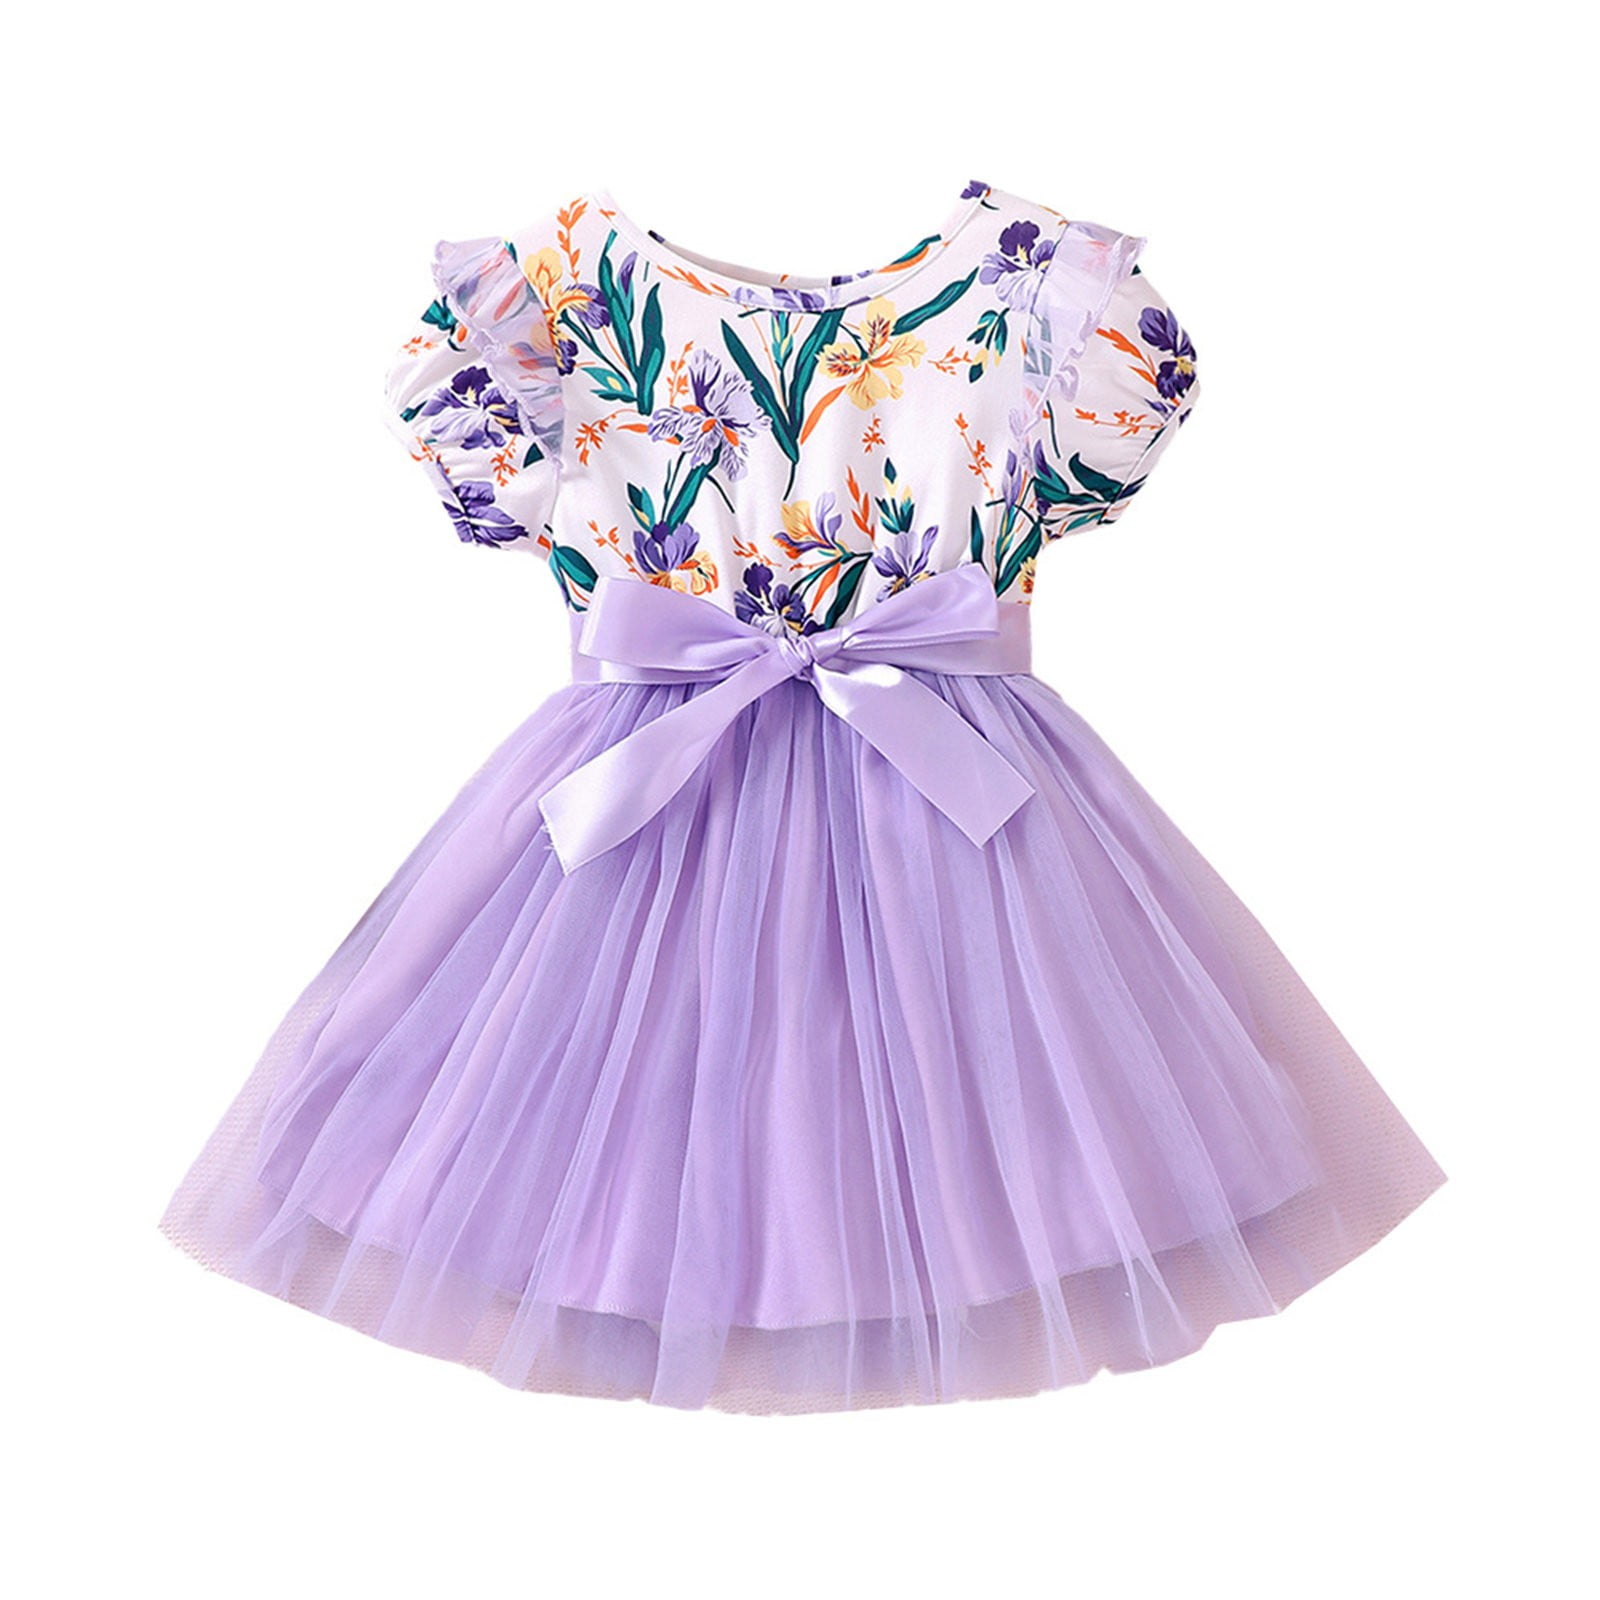 Dresses Girls Floral Fly Sleeve Kids Tulle Party Dress Purple 4-5Y ...